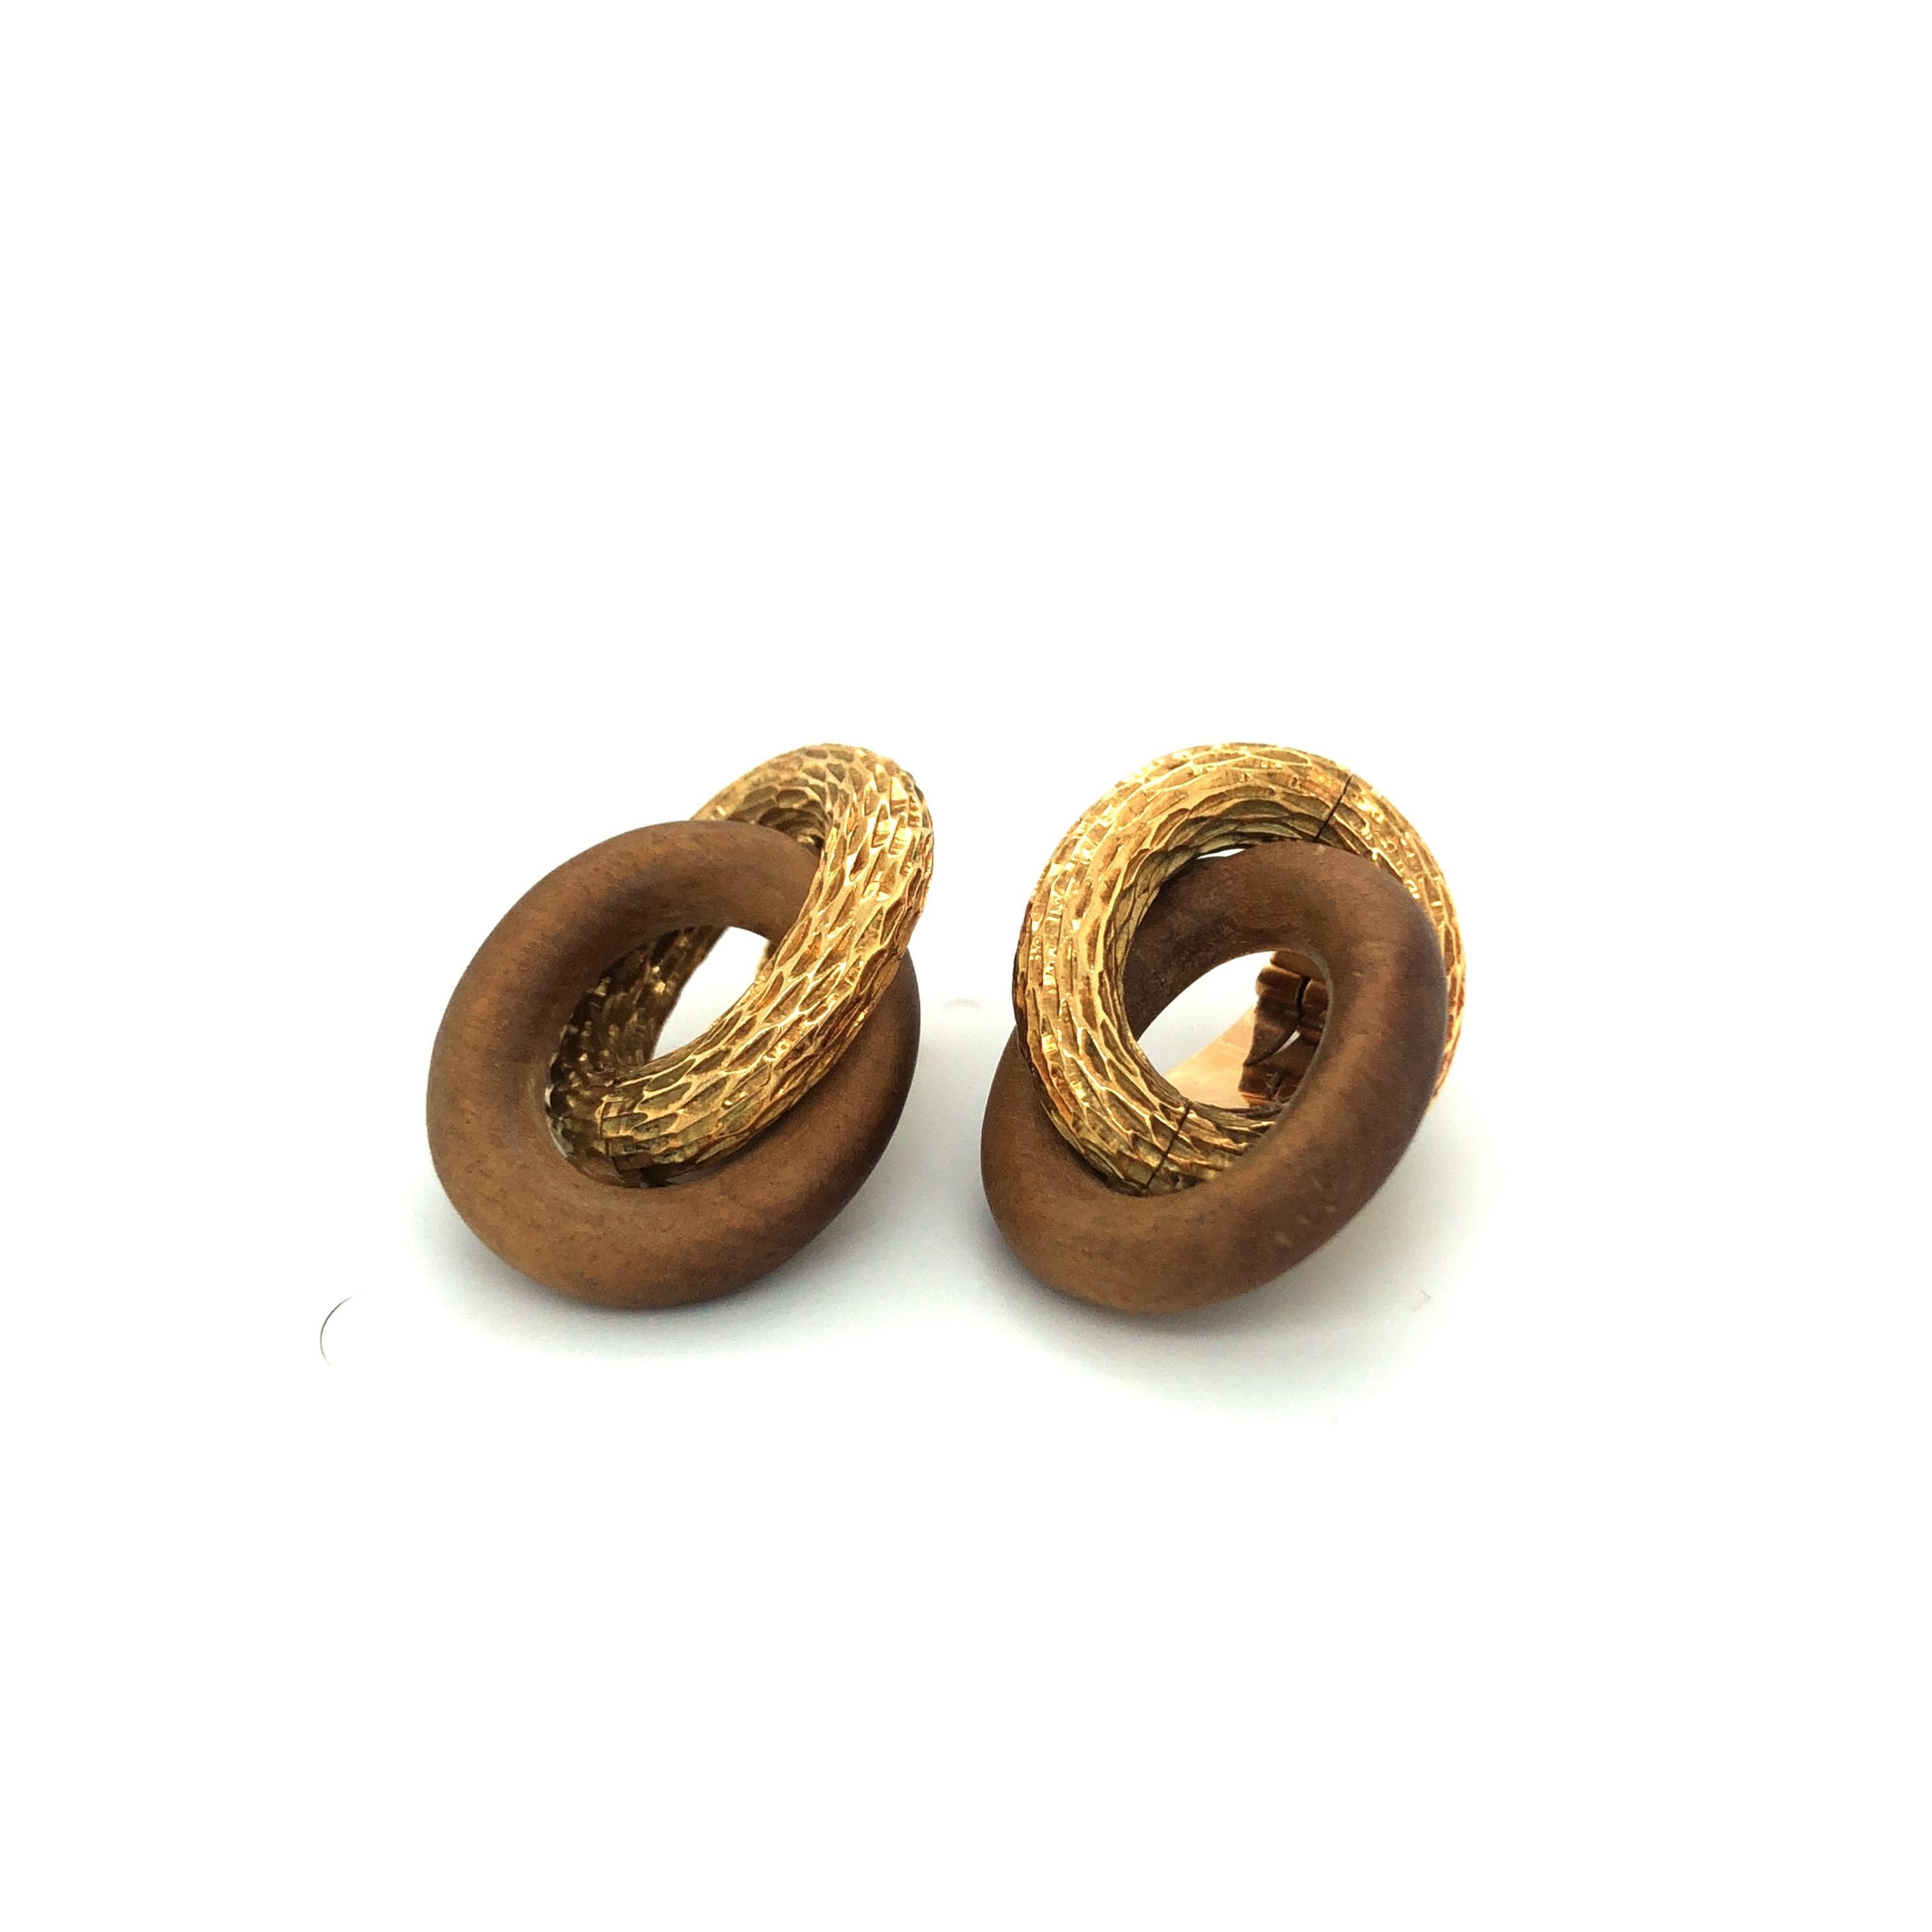 Pair of 18 karat yellow gold and sandalwood vintage ear clips by René Boivin, each composed of two interlocking oval rings - one in structured yellow gold imitating wood and the other one in polished sandalwood. 
These ear clips were crafted in the